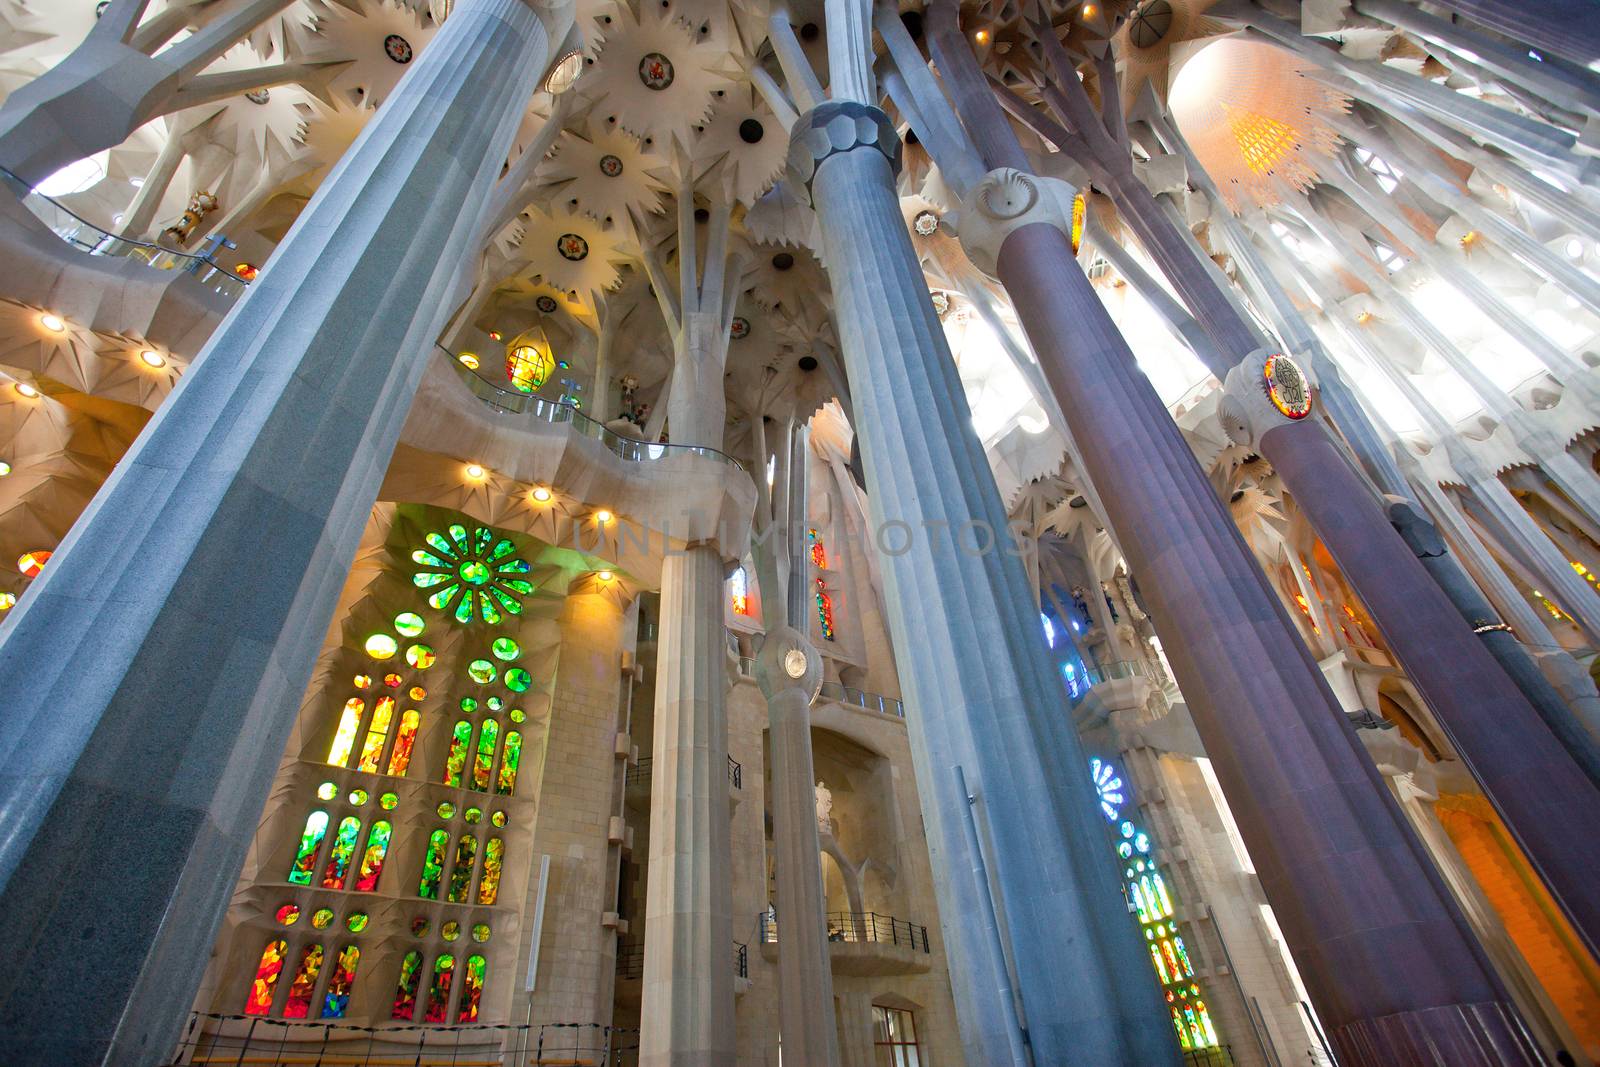 BARCELONA SPAIN – JUNE 13: "La Sagrada Familia", the cathedral designed by Gaudi, which is being build since 19 March 1882 with the donations of people, on JUNE 13, 2013 in Barcelona Spain